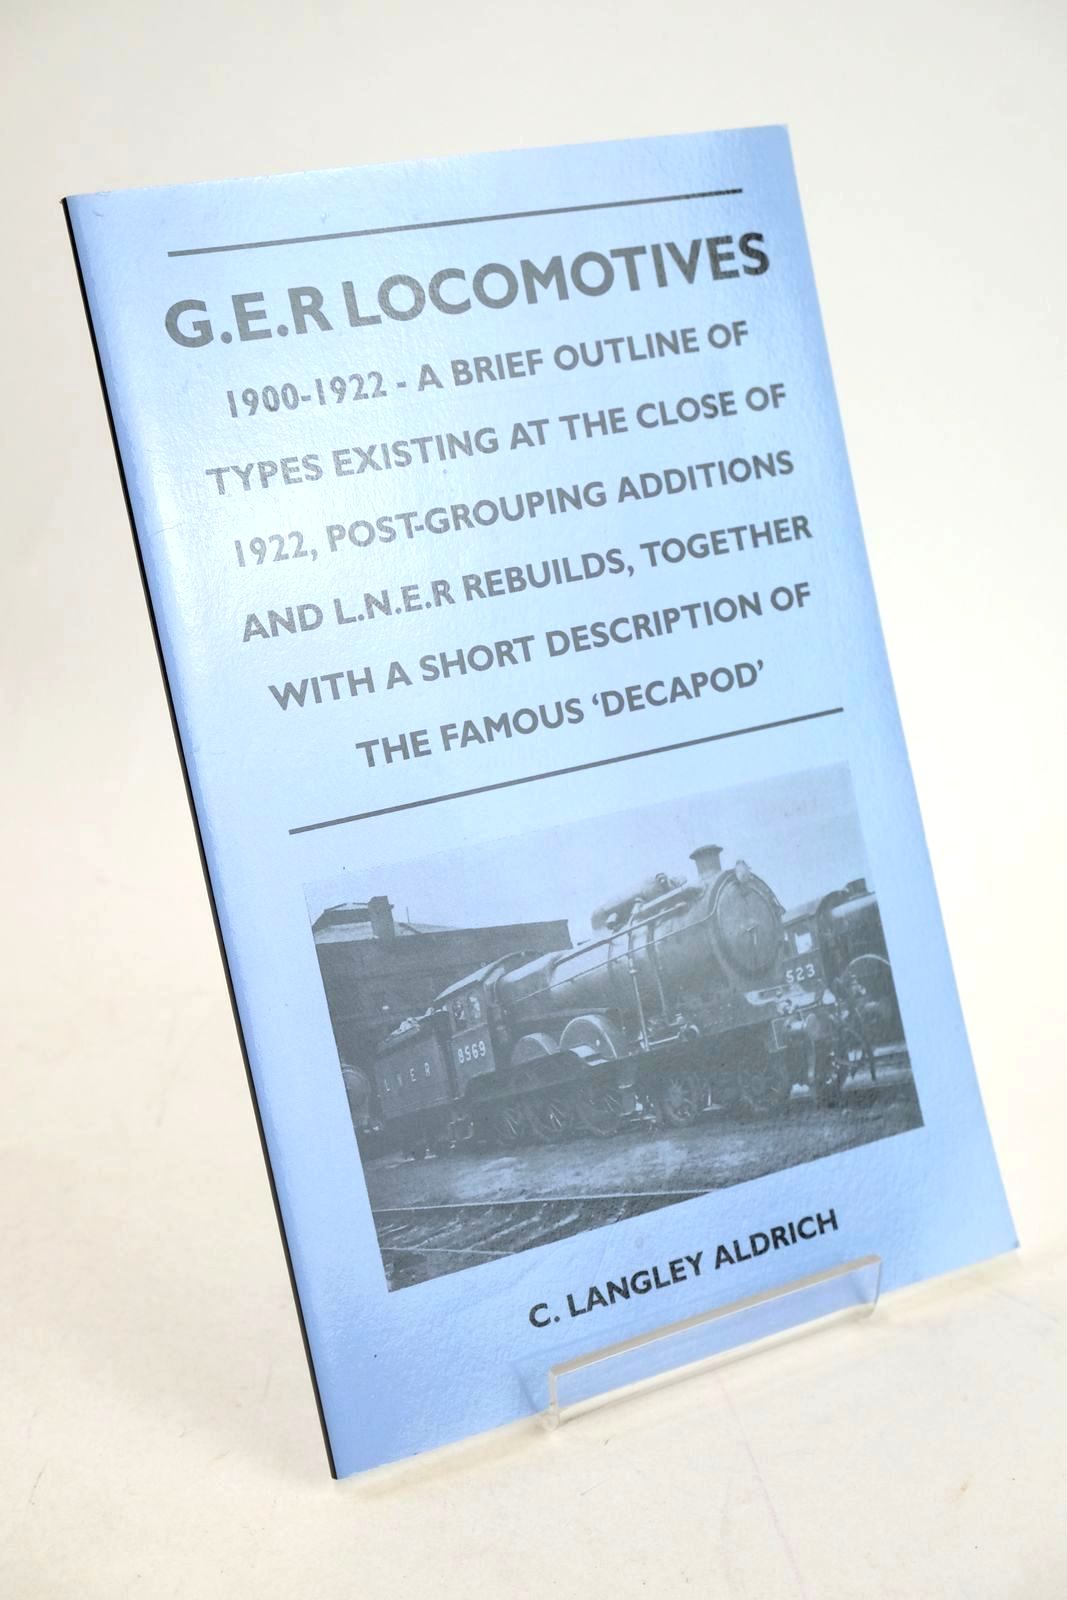 Photo of G.E.R. LOCOMOTIVES 1900-1922 written by Aldrich, C. Langley published by Jackson Press (STOCK CODE: 1327489)  for sale by Stella & Rose's Books